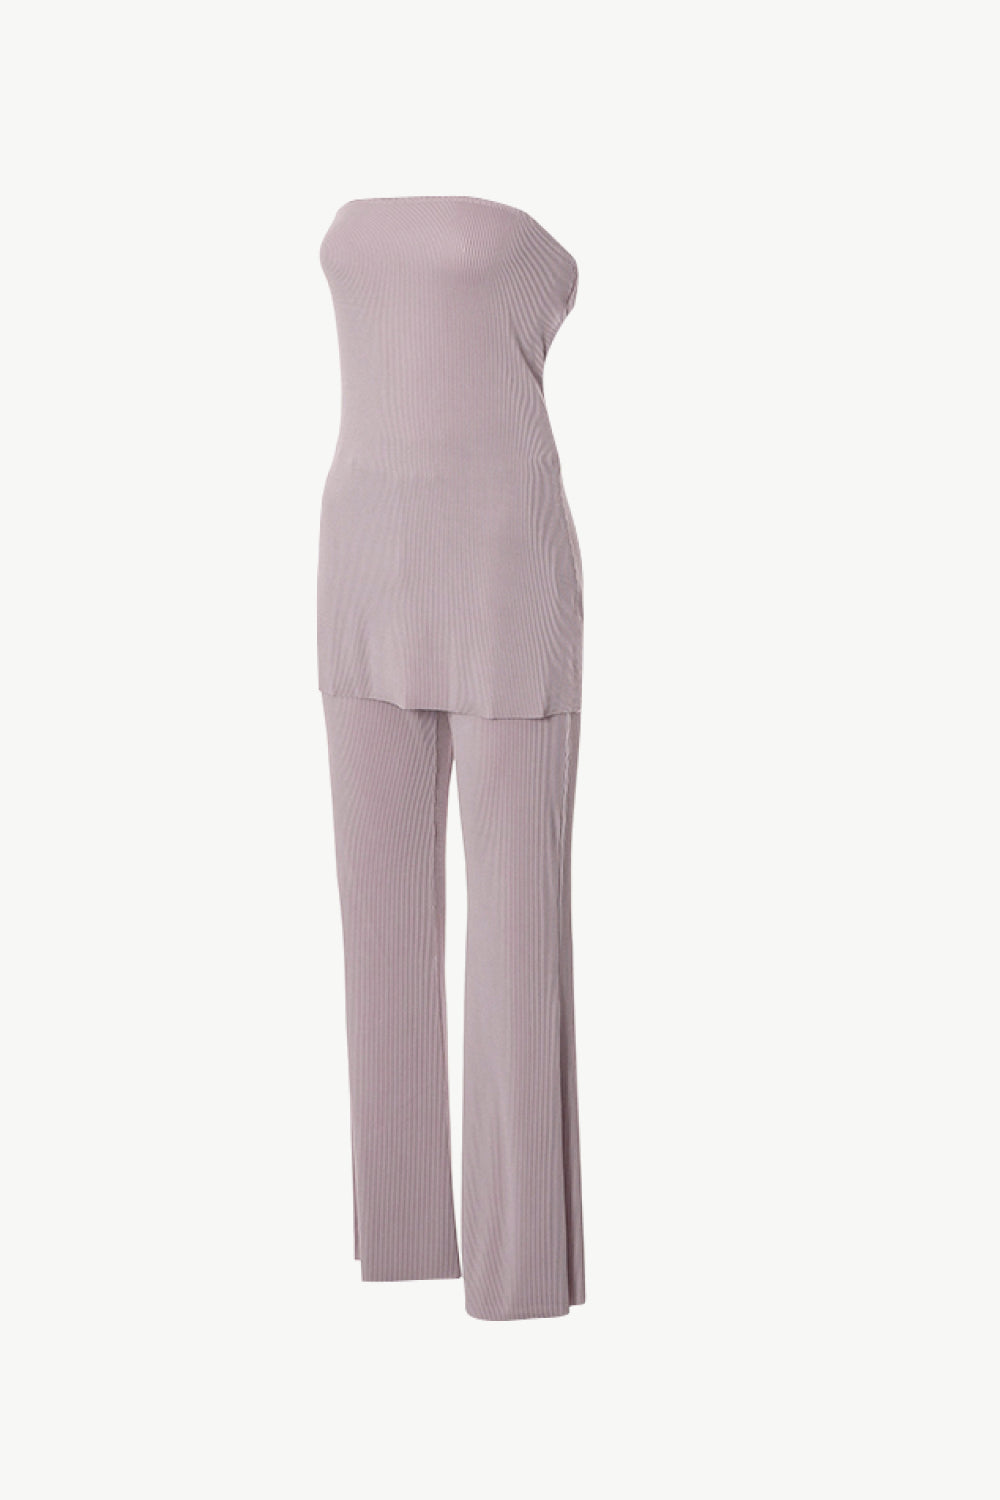 SMOOTH LIKE BUTTER STRAPLESS TOP WITH WIDE LEG PANT SET